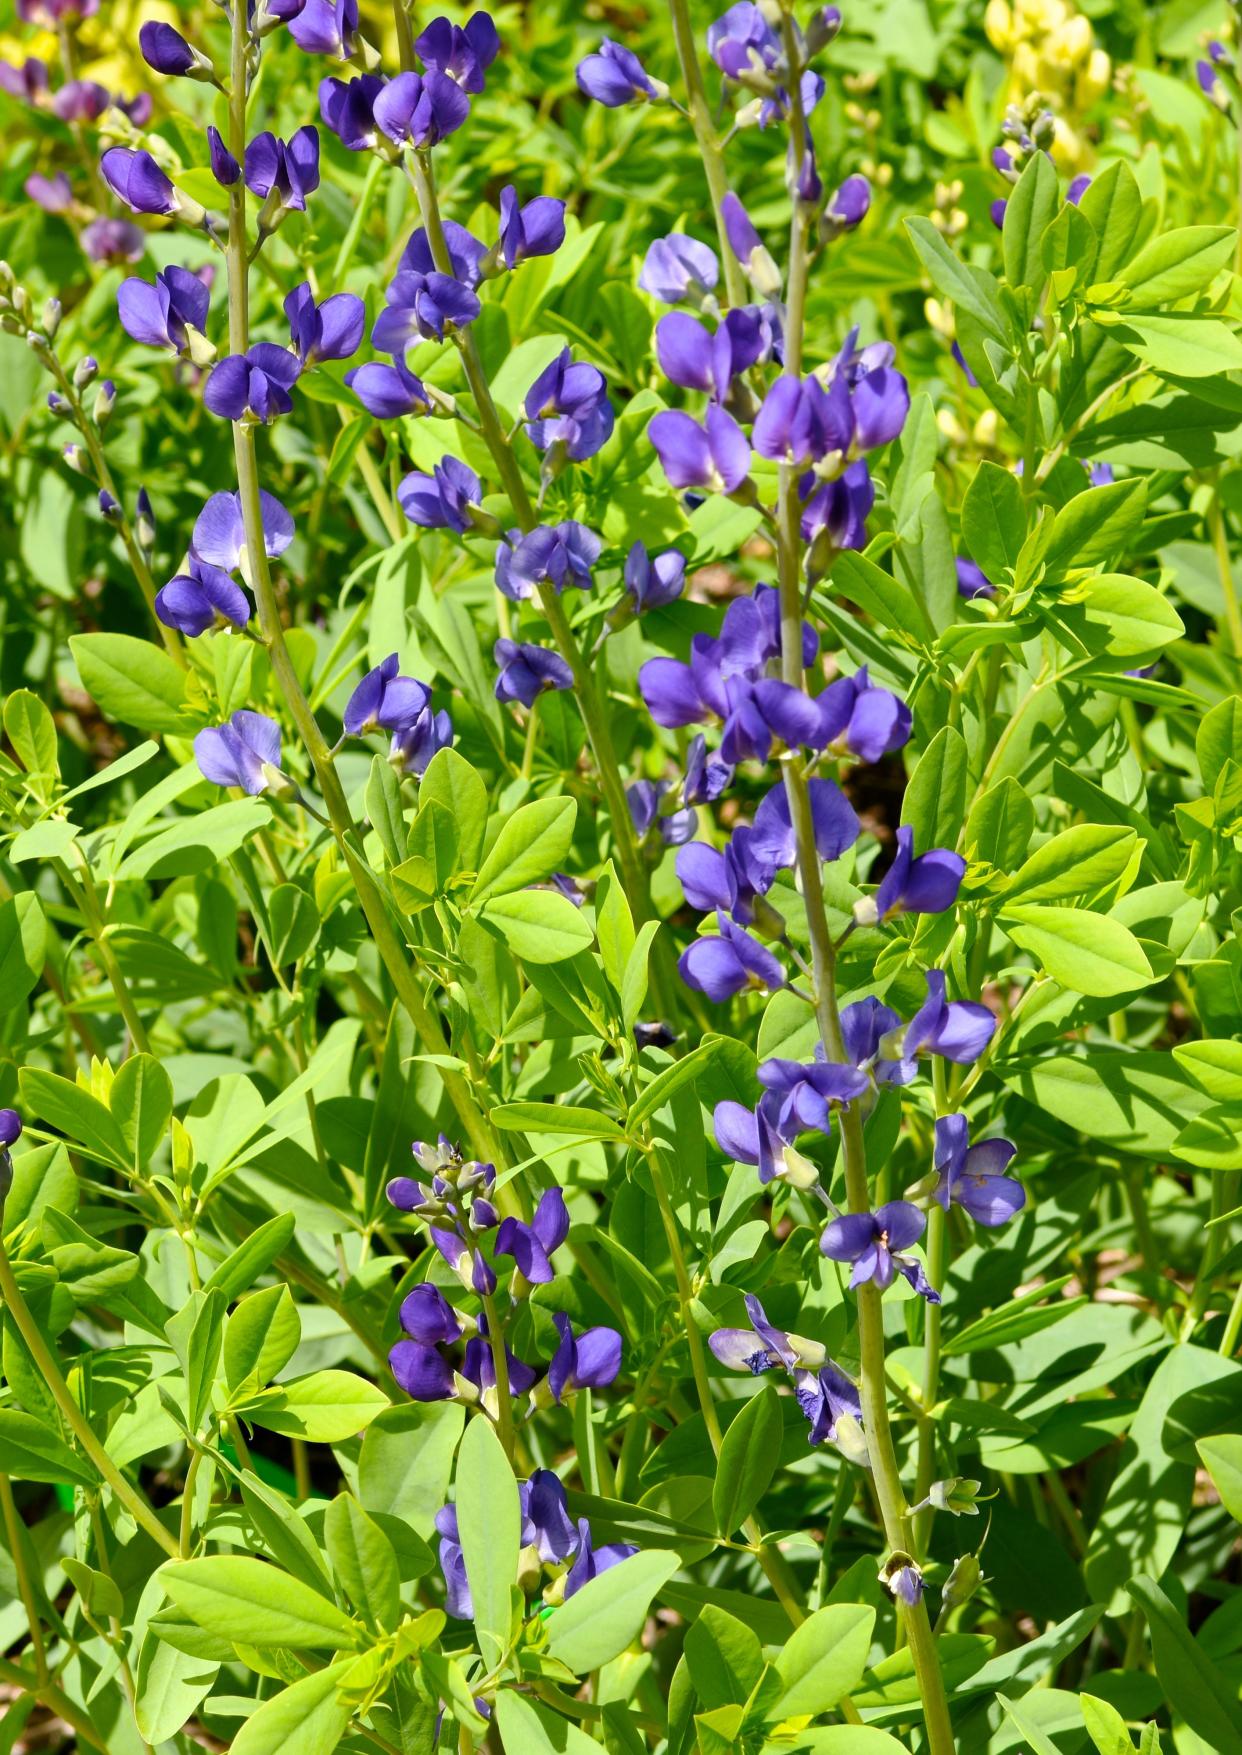 Baptisia, commonly known as blue wild indigo, are architectural gems in the garden.